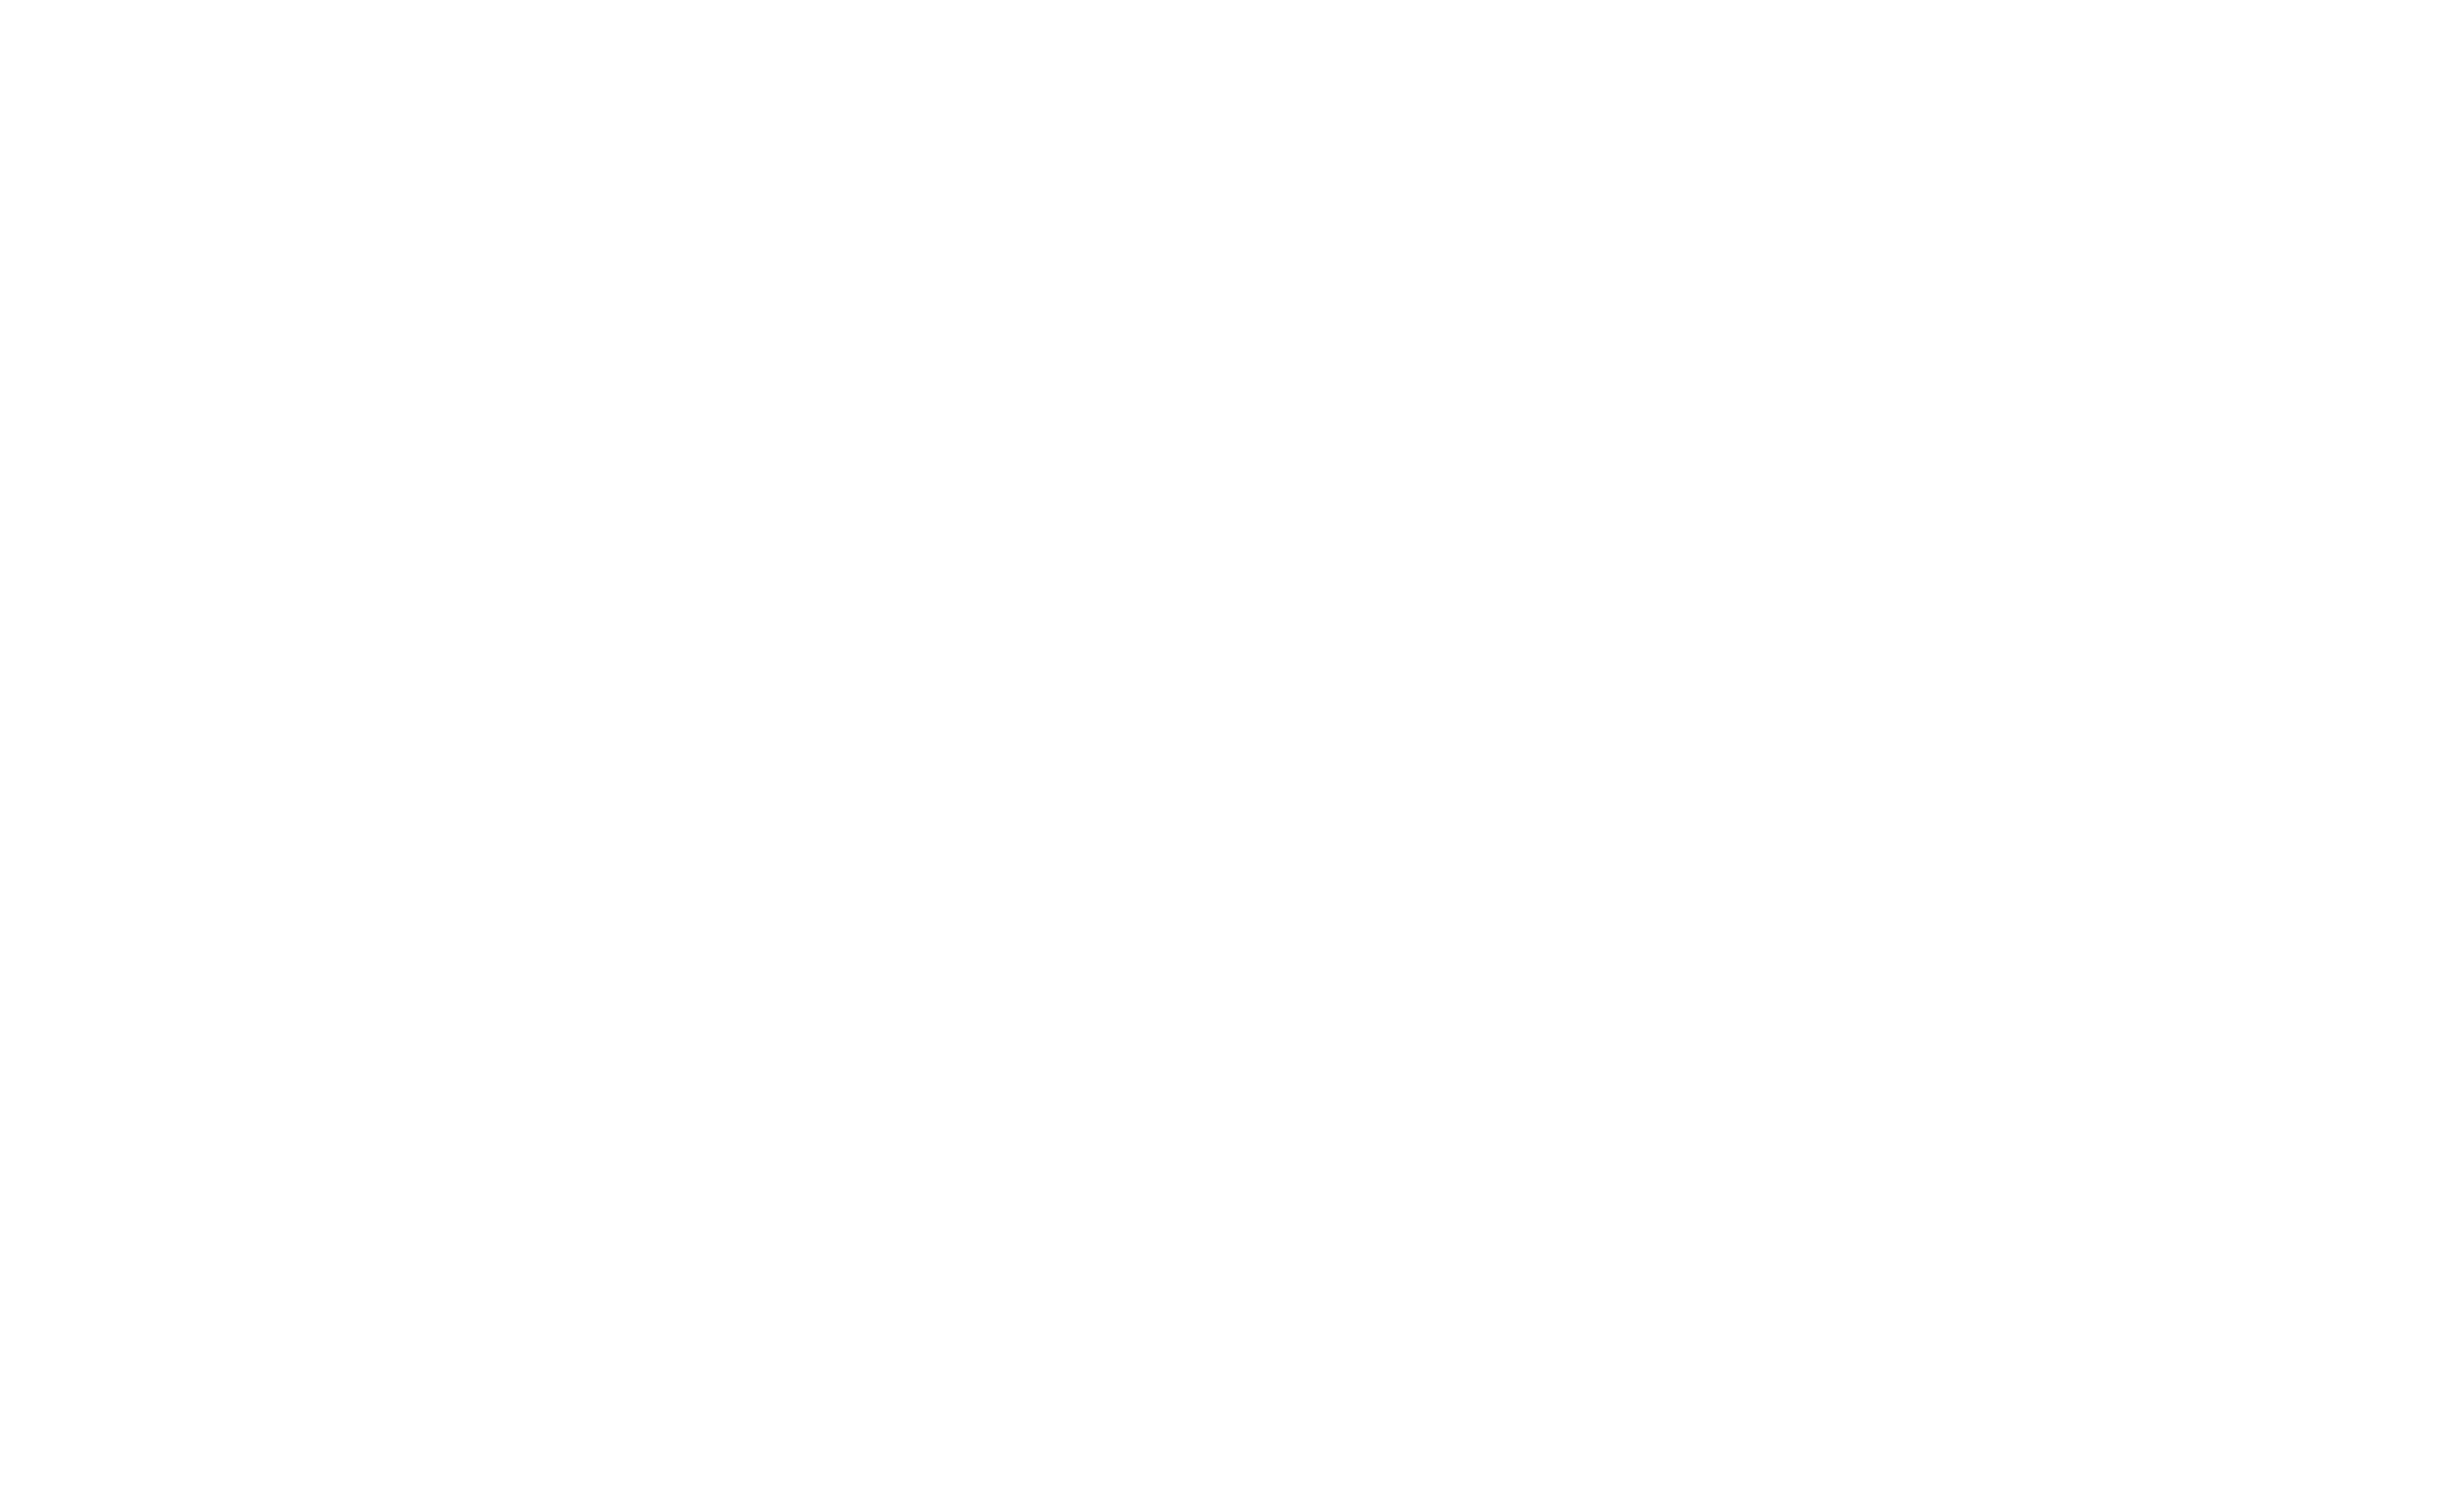 knowrx logo stacked